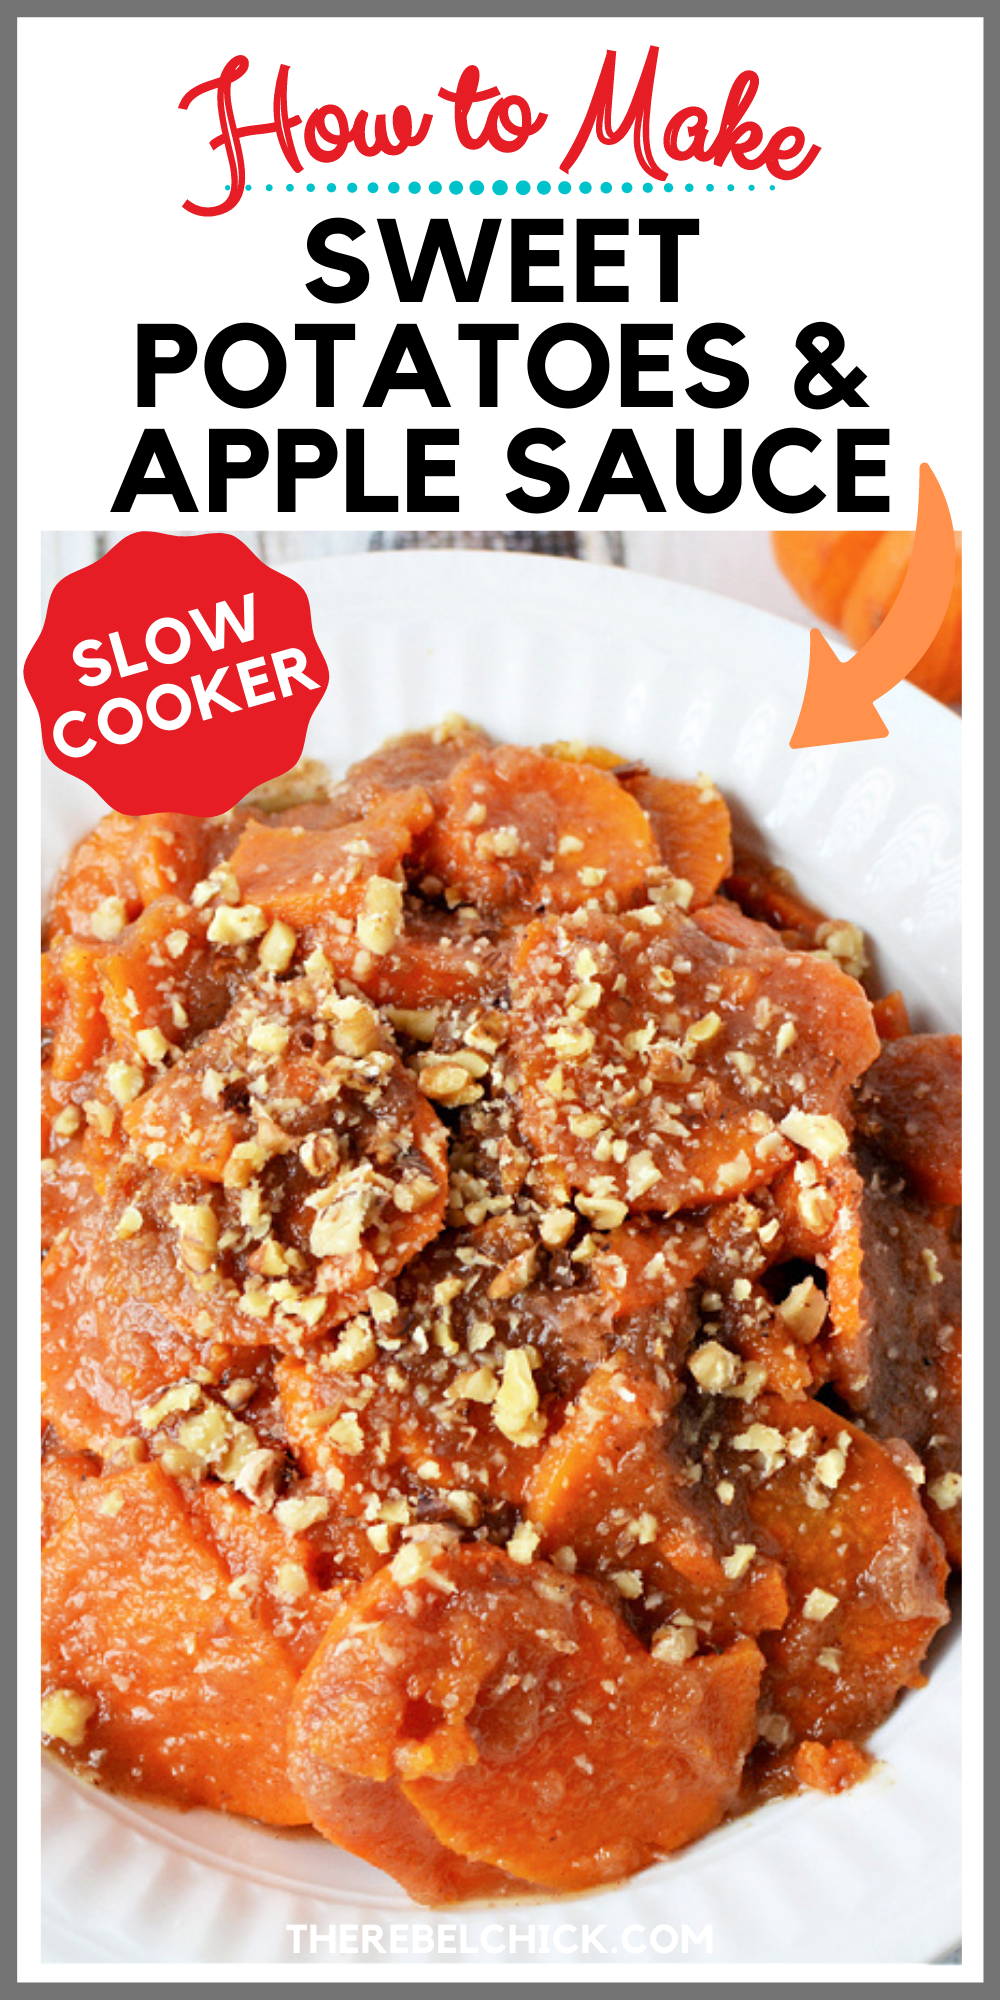 Easy Slow Cooker Side Dish Recipe